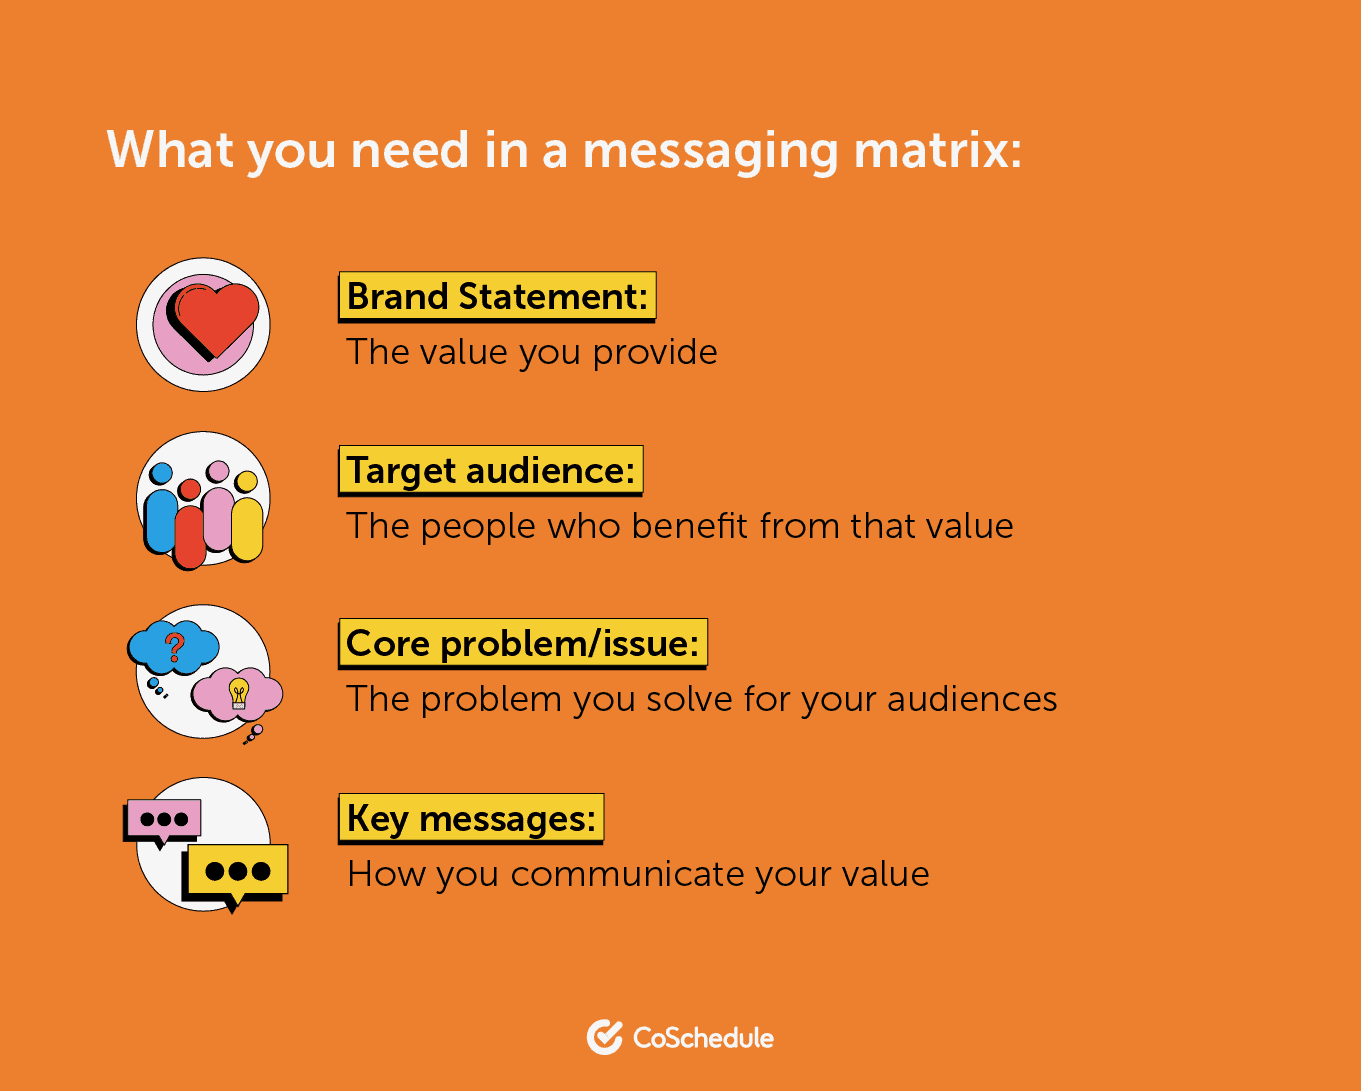 CoSchedule graphic on what you need in a messaging matrix